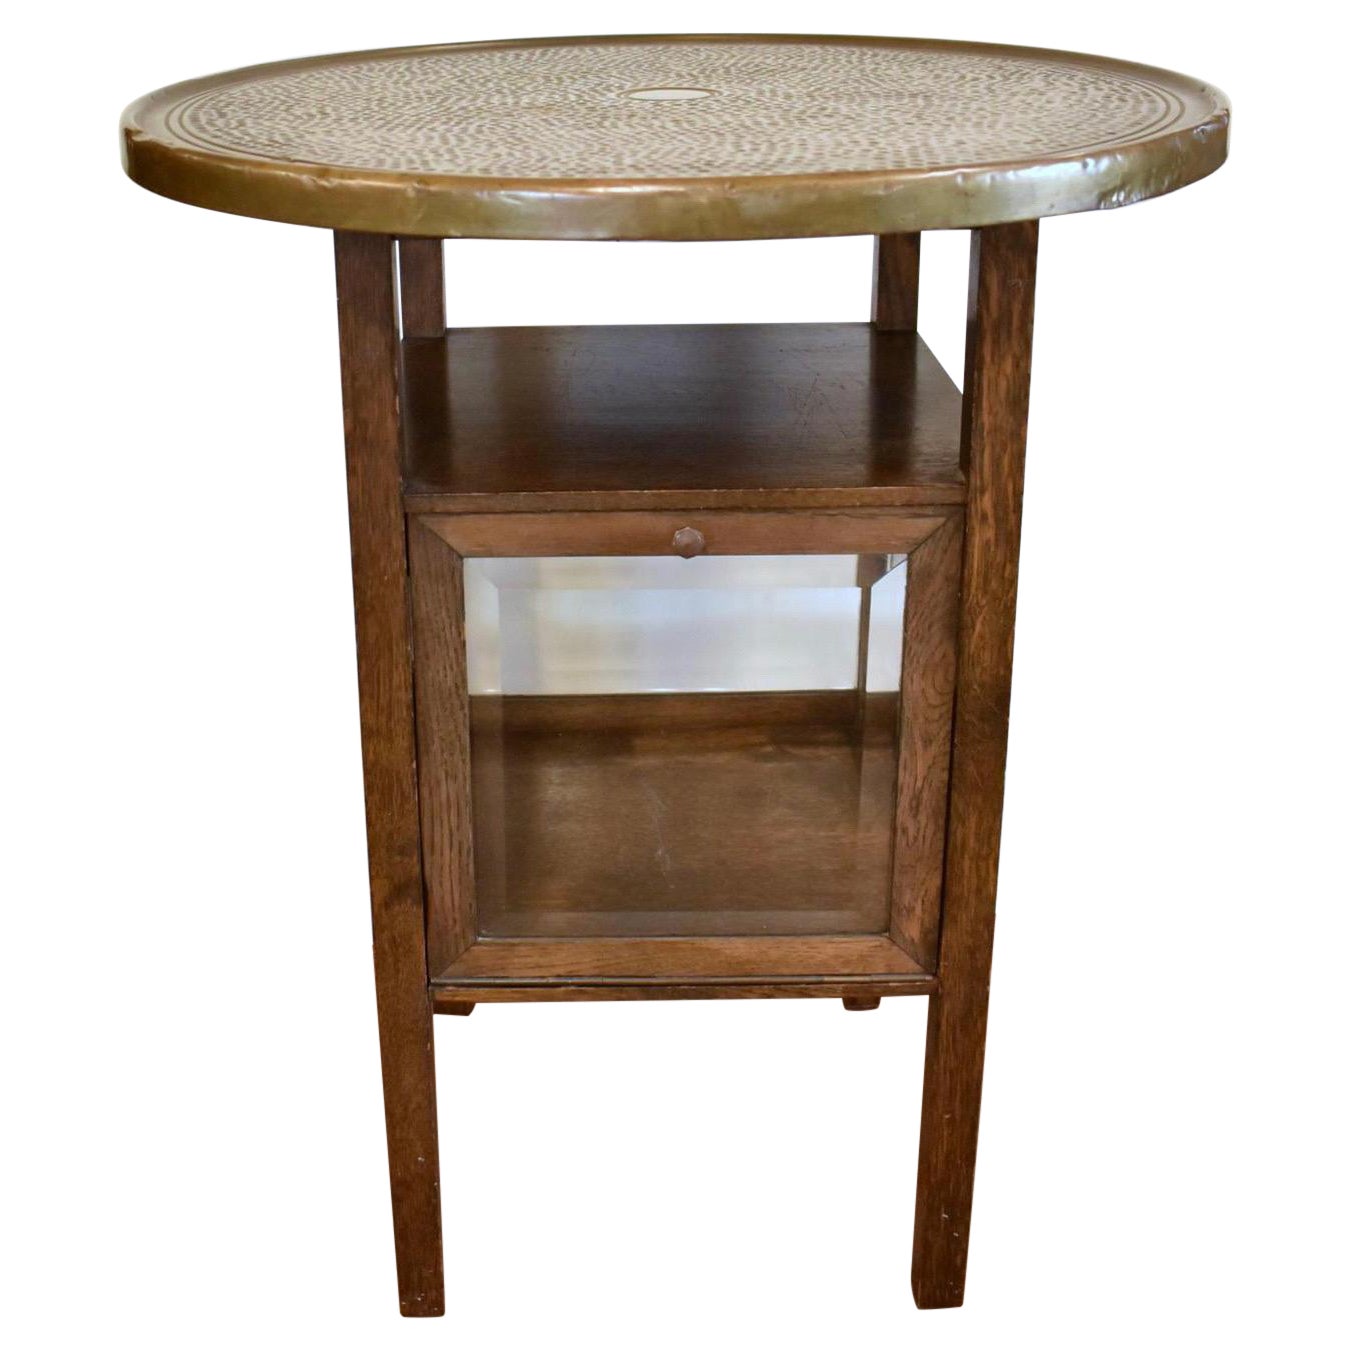 Antique Arts & Crafts Brass Top Table with Display Cabinet Compartment